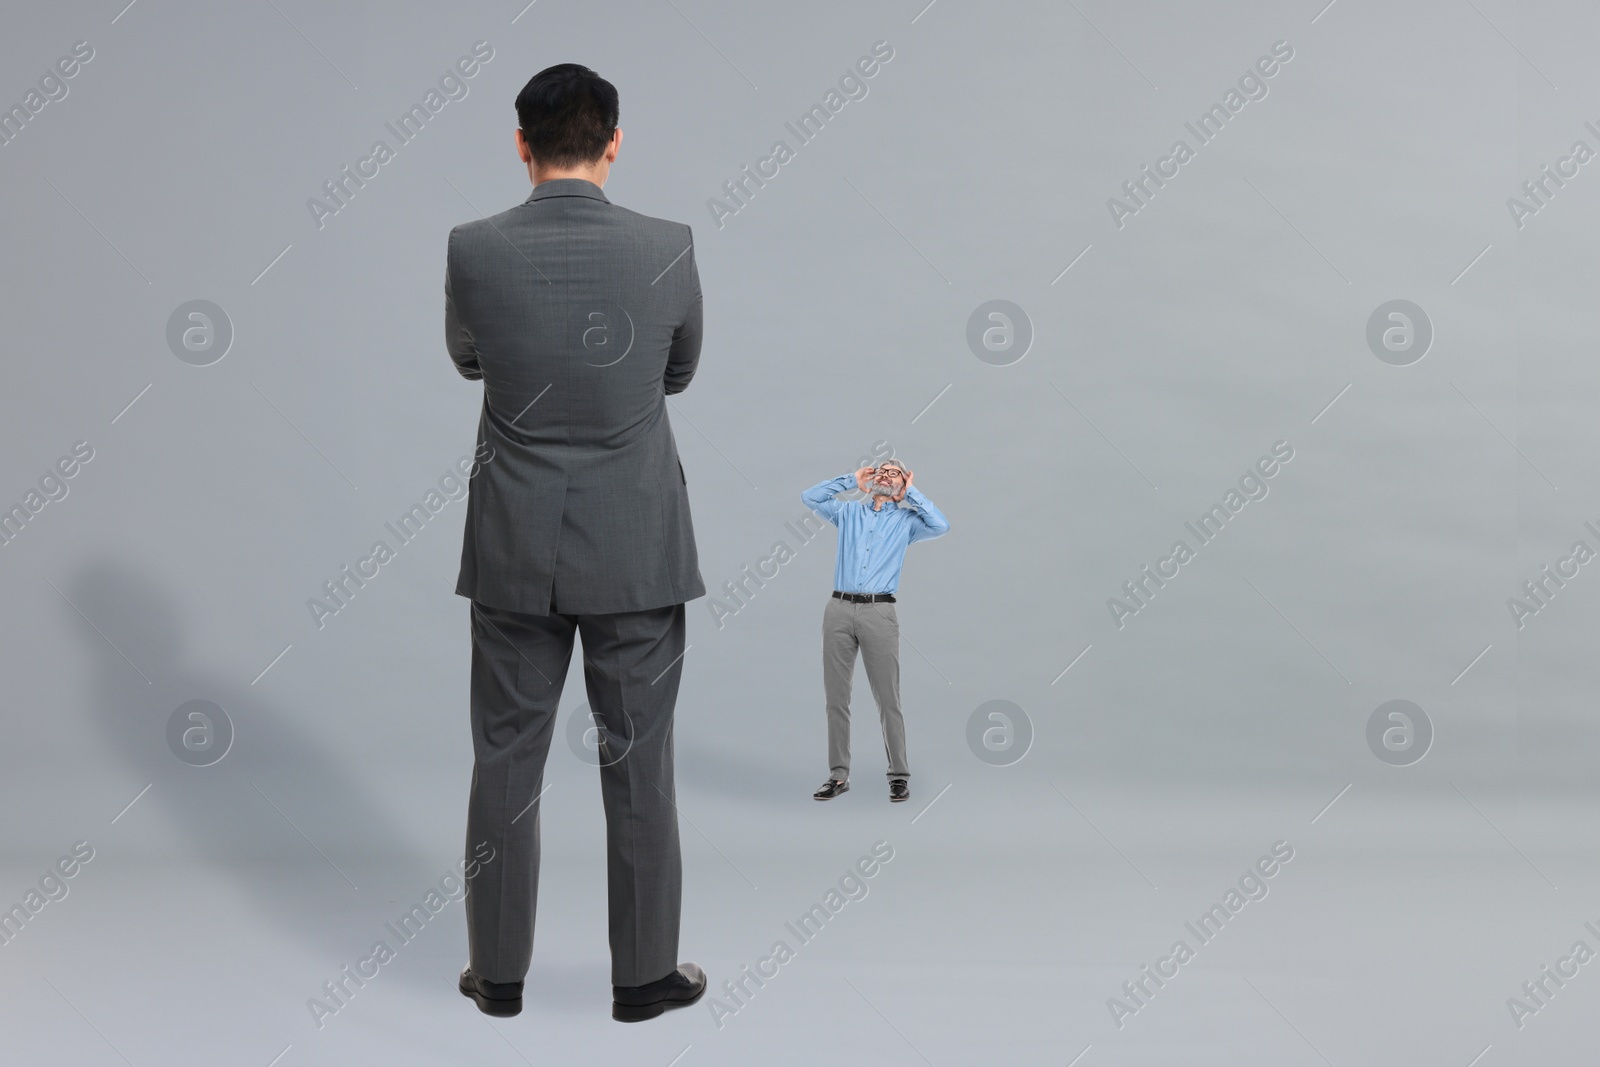 Image of Small man shouting to giant boss on grey background